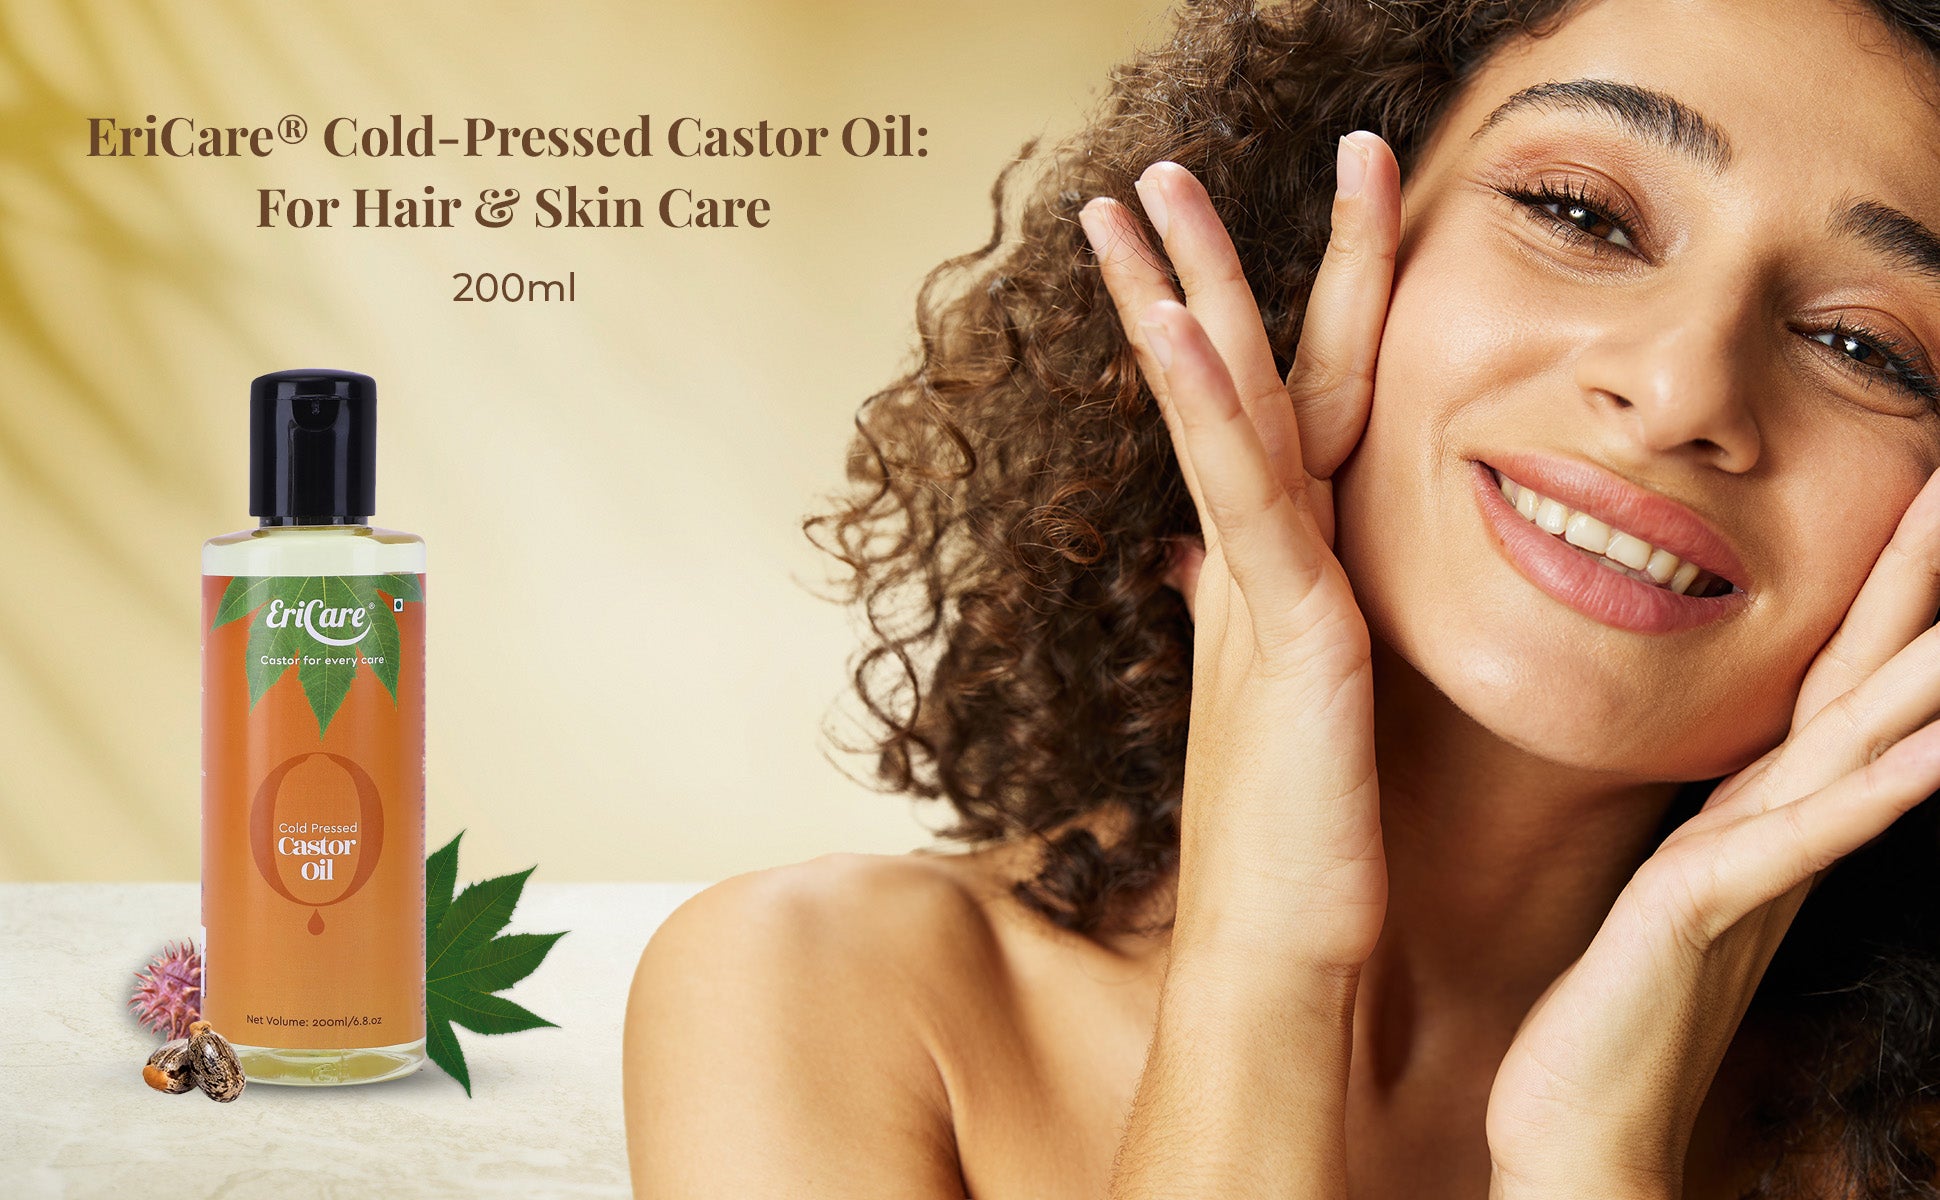 Introductory post of EriCare Cold-Pressed Castor Oil 200ML where a women with dewy glowing look and manageable hair texture shows importance of virgin castor oil for personal care